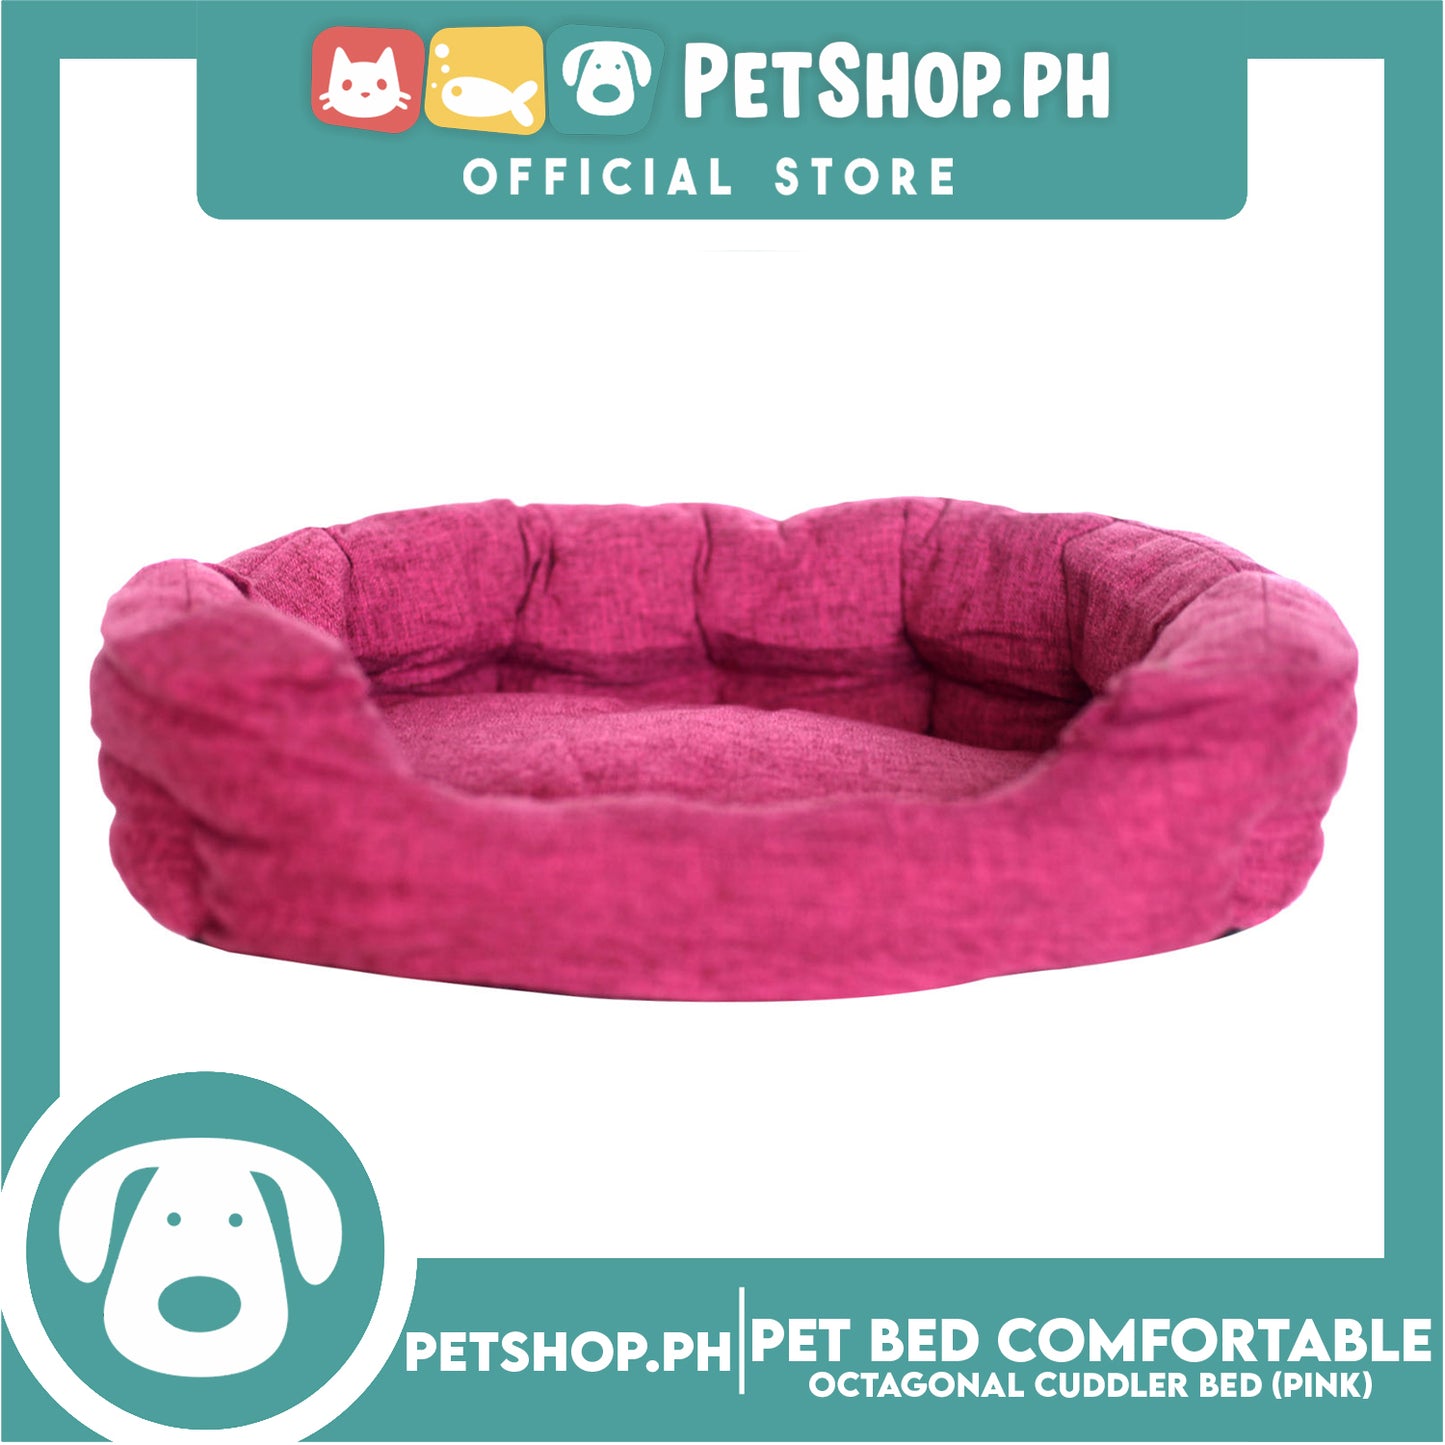 Pet Bed Comfortable Octagonal Cuddler Dog Bed 55x47x18cm Medium for Dogs & Cats (Pink)